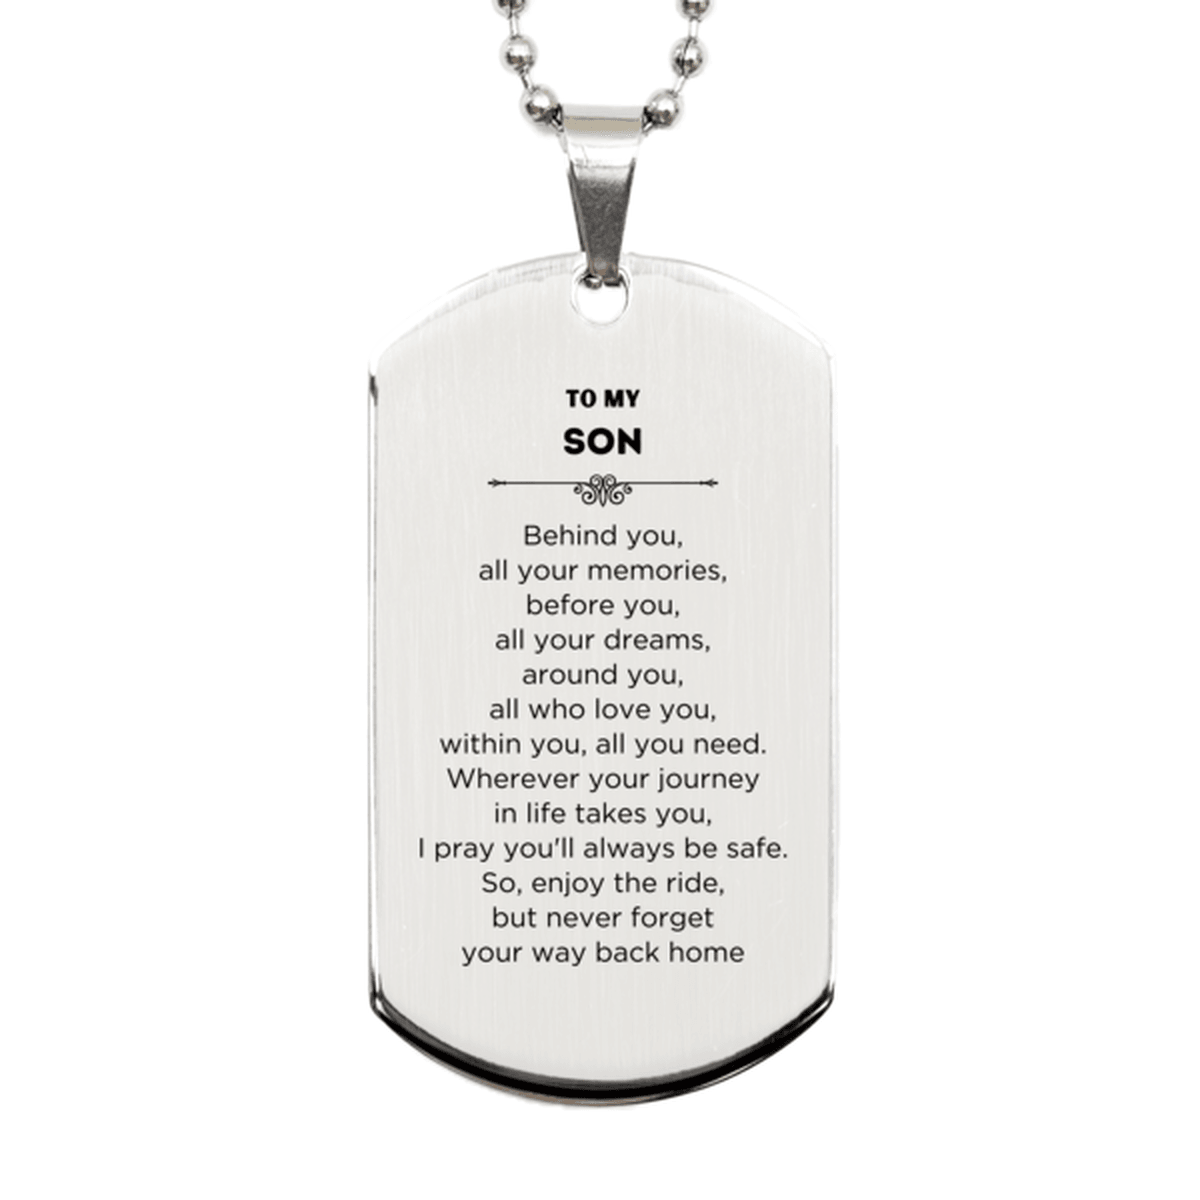 Son Silver Dog Tag Necklace Birthday Christmas Unique Gifts Behind you, all your memories, before you, all your dreams - Mallard Moon Gift Shop